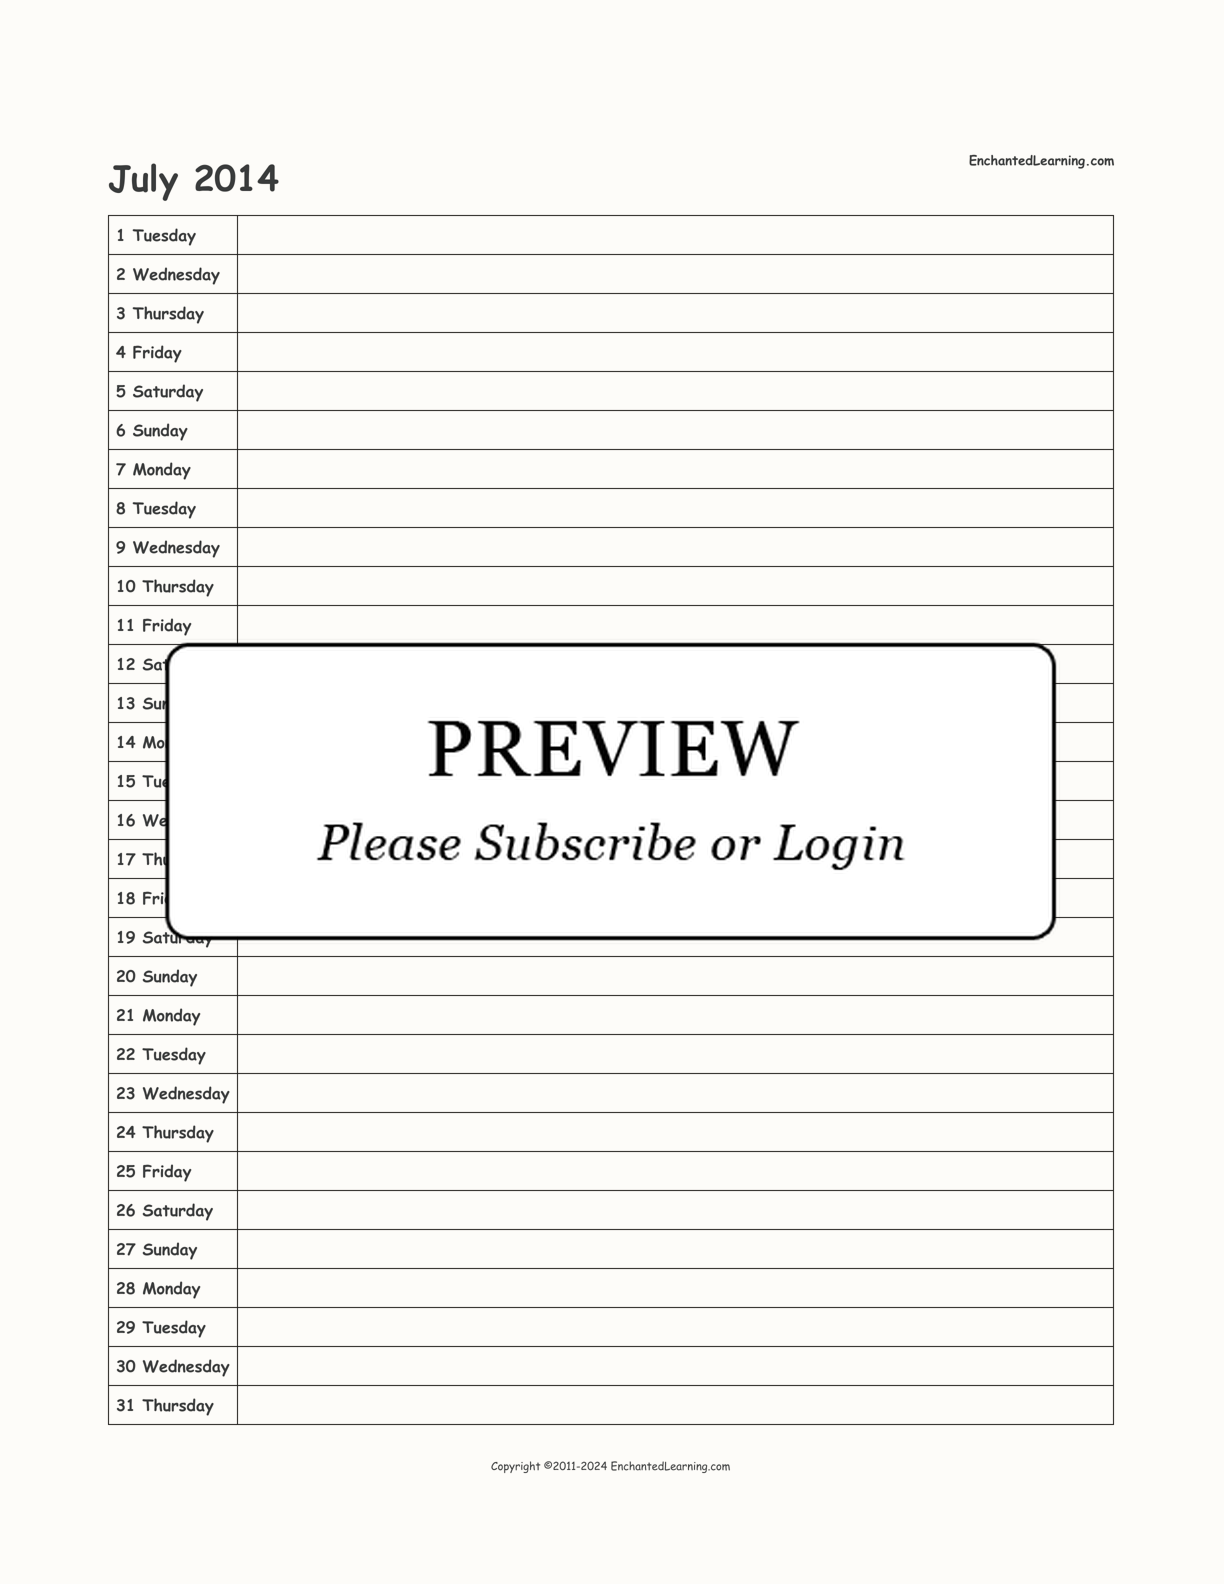 2014 Scheduling Calendar interactive printout page 7